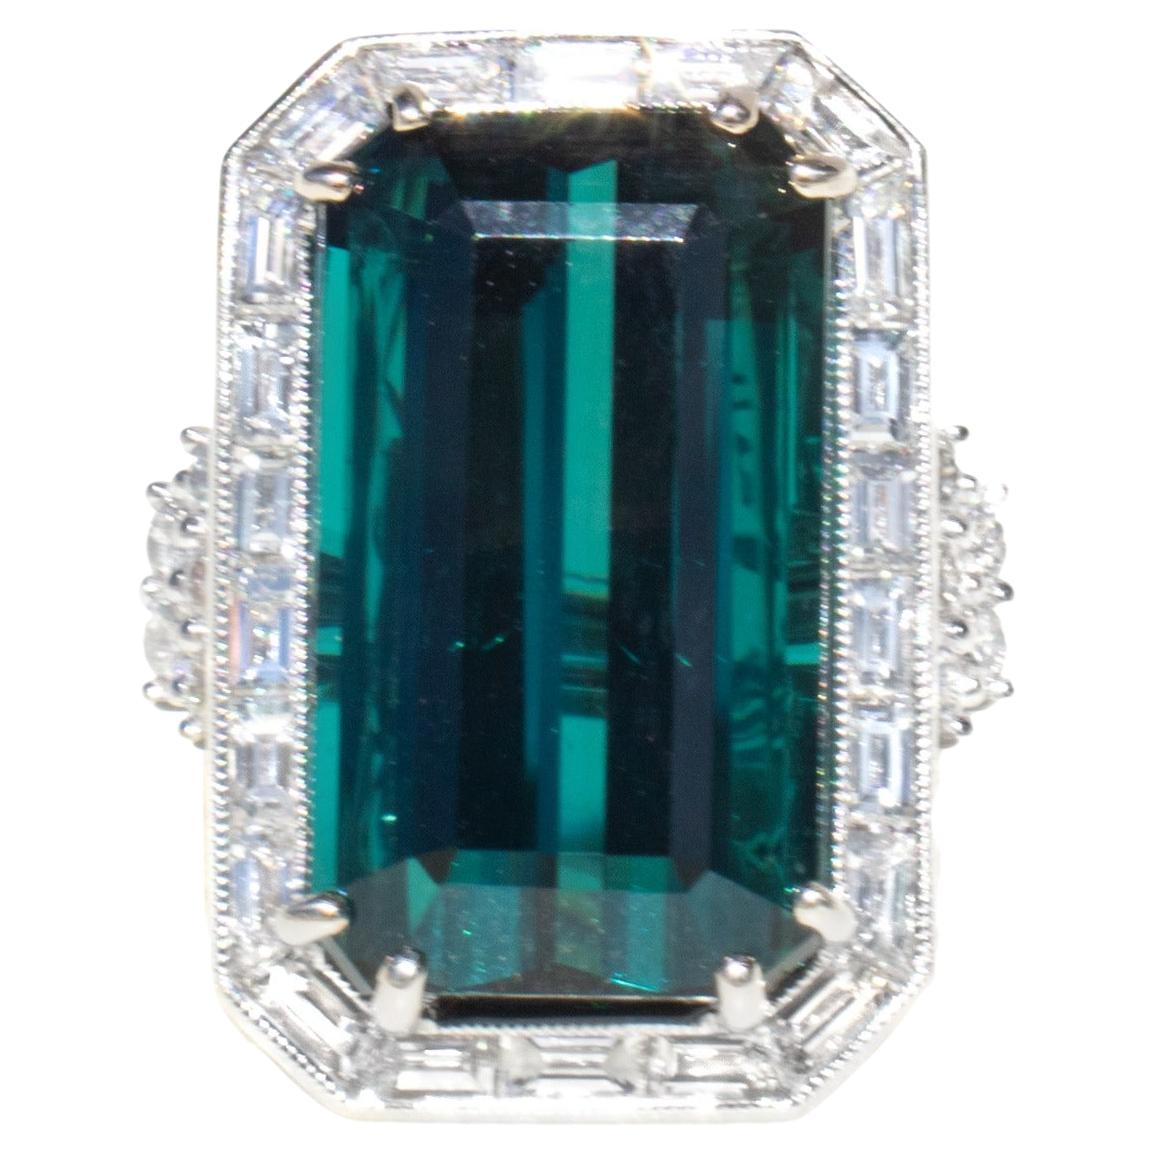 This gemstone is both rare and spectacular. It is a large, rare, 20 carat 'popsicle blue' indicolite tourmaline from the mountains of Kashmir. 

To properly showcase this spectacular gemstone, we designed an 18K white gold setting with magnificent